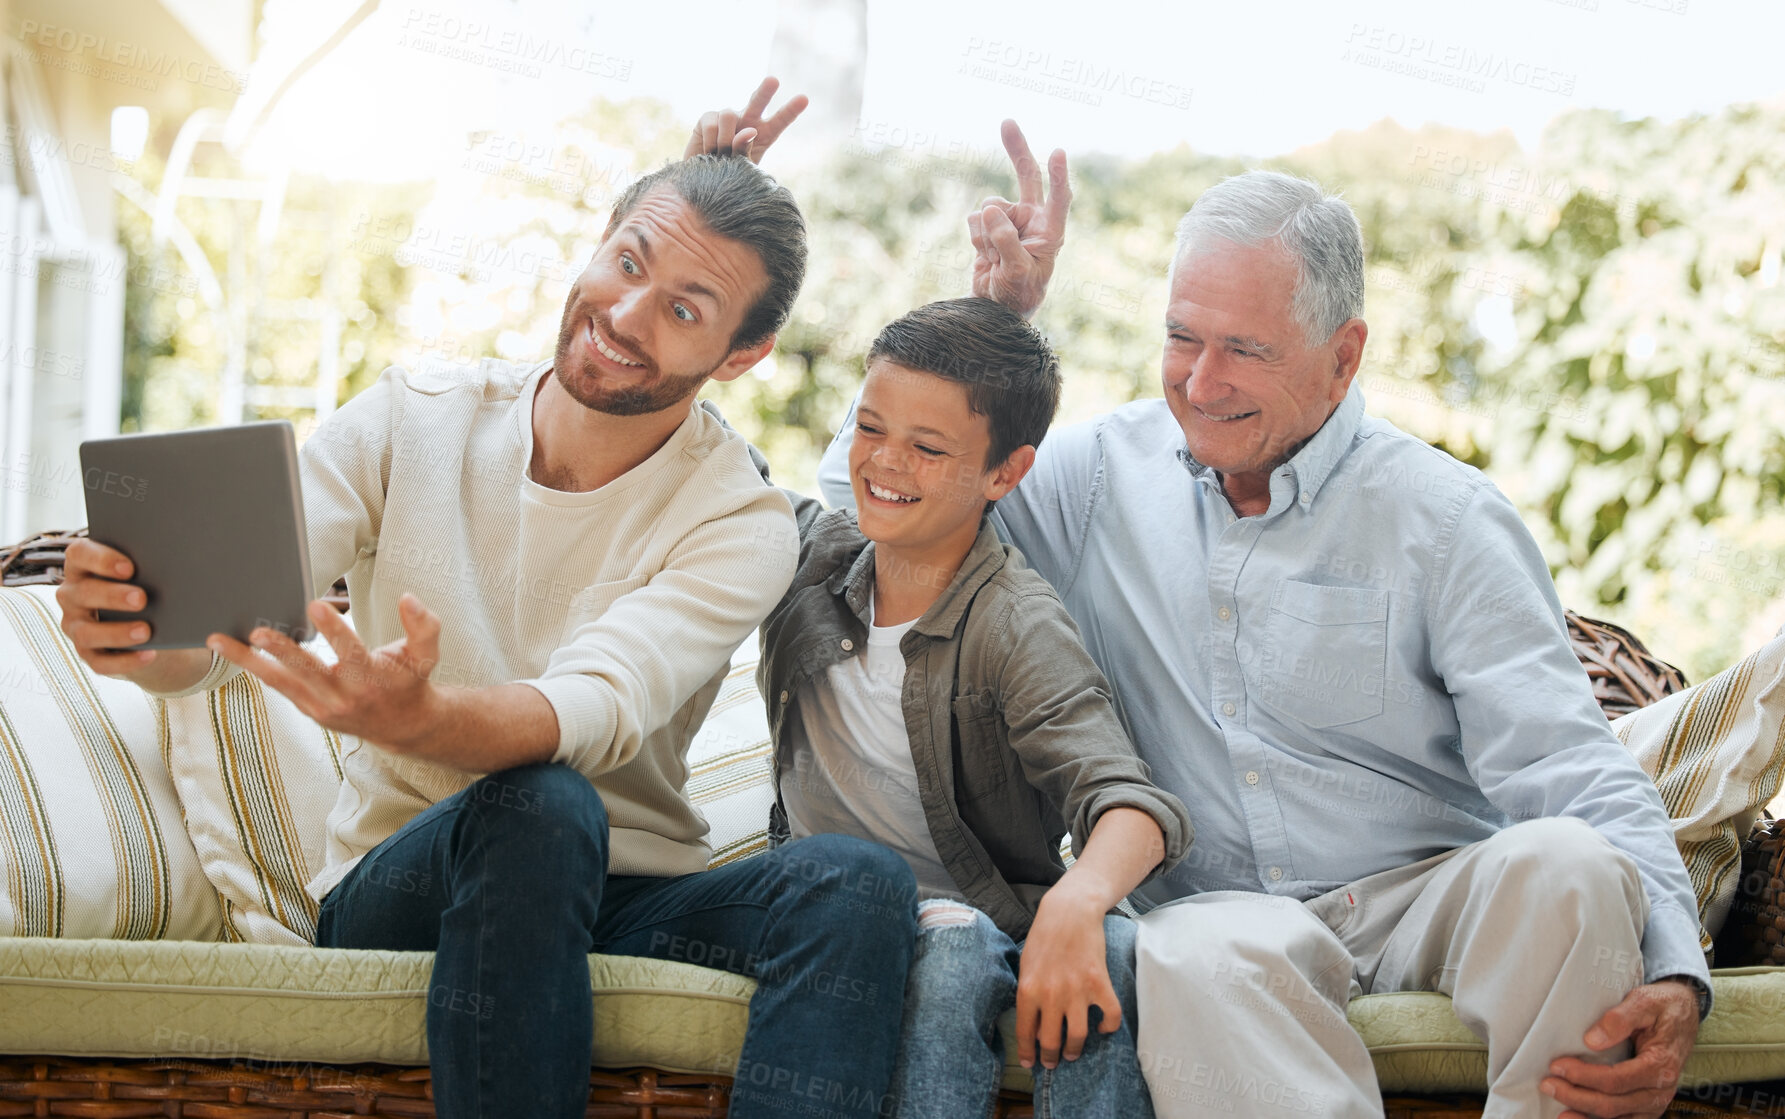 Buy stock photo Shot of a man using a digital tablet while sitting outside with son and his elderly father